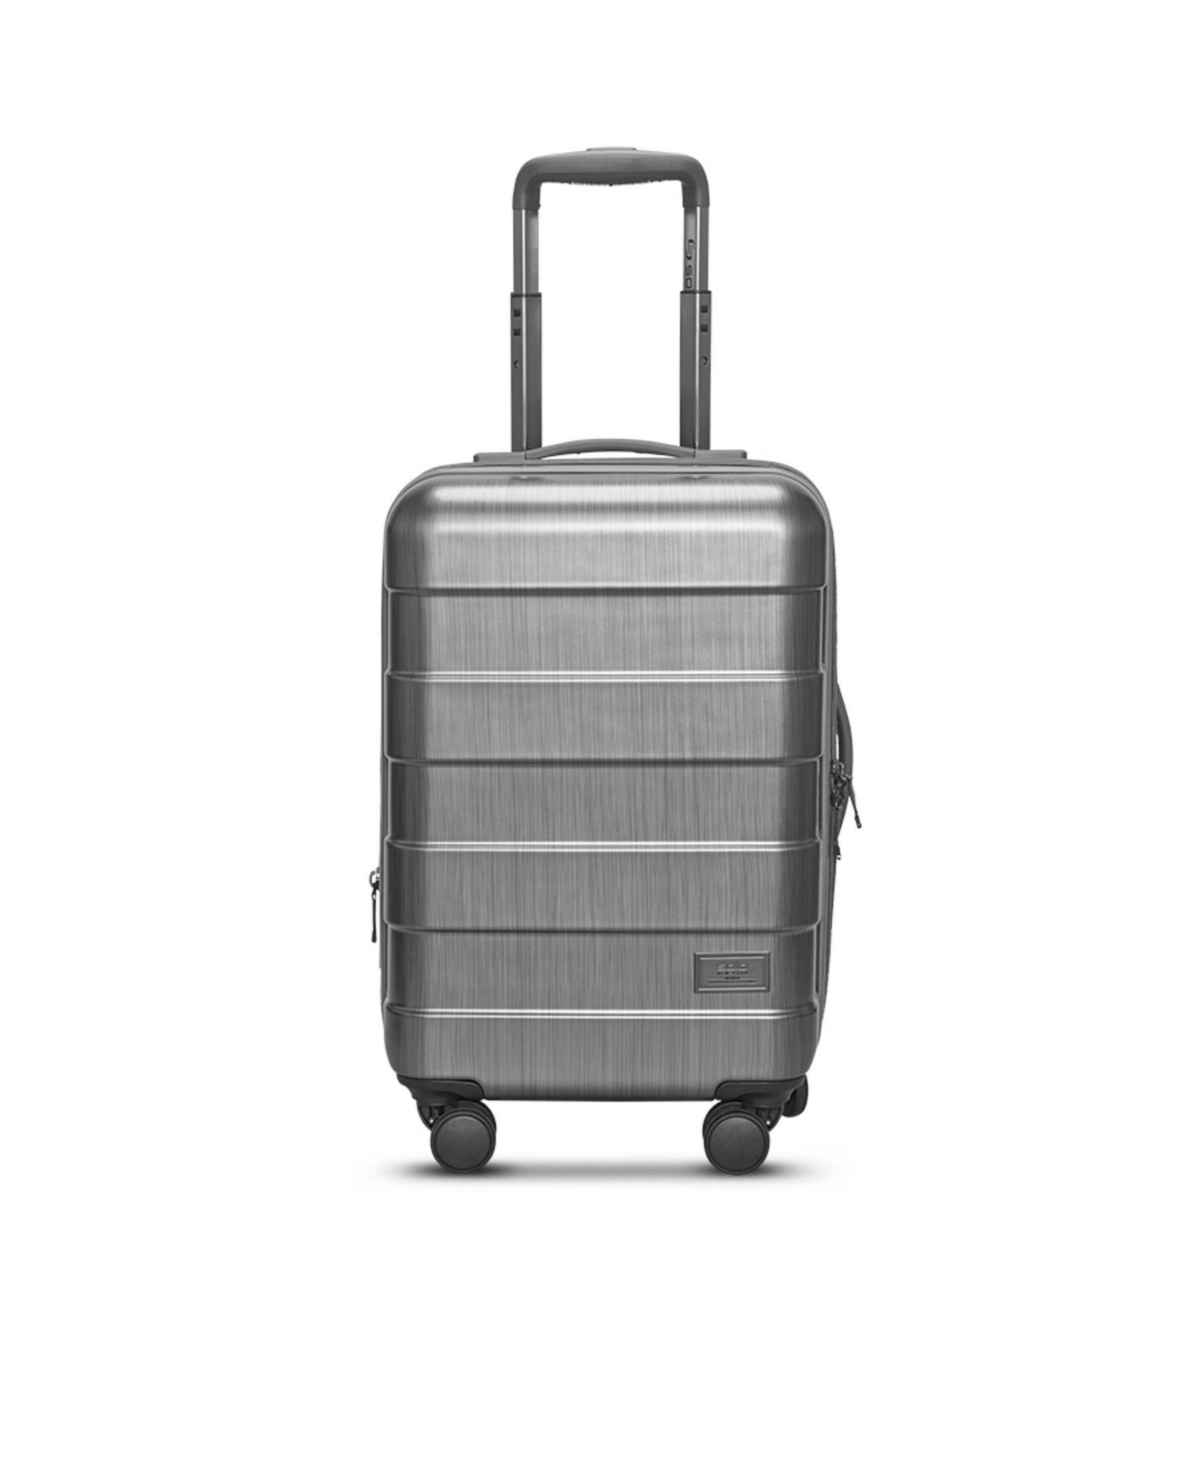 Solo New York Re-serve Carry-on Spinner In Gray